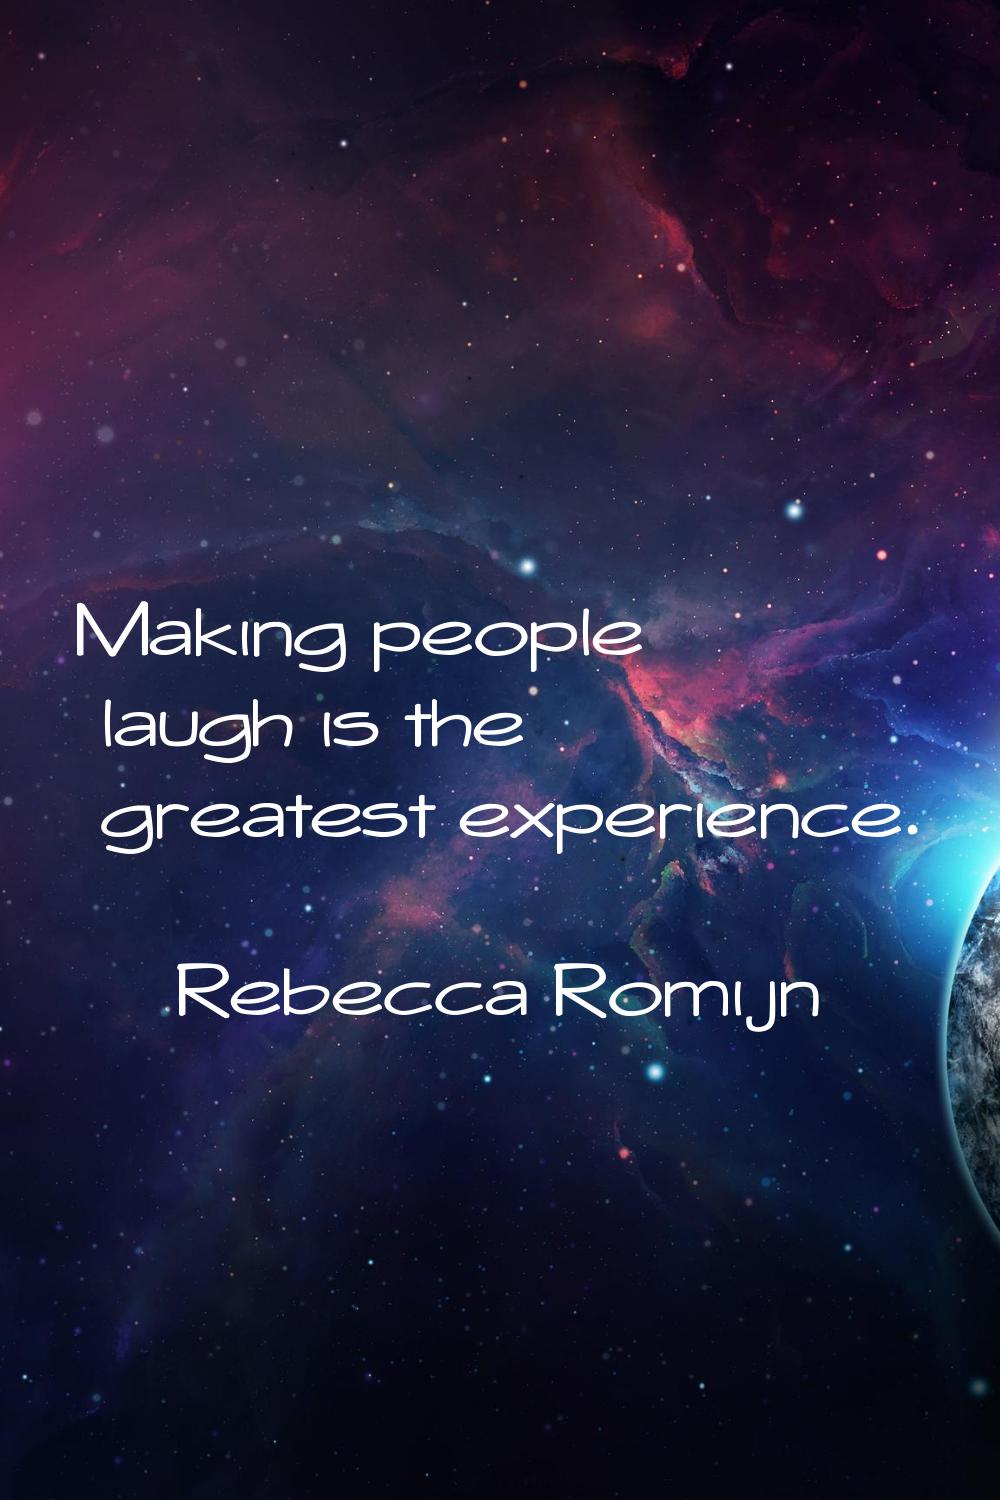 Making people laugh is the greatest experience.